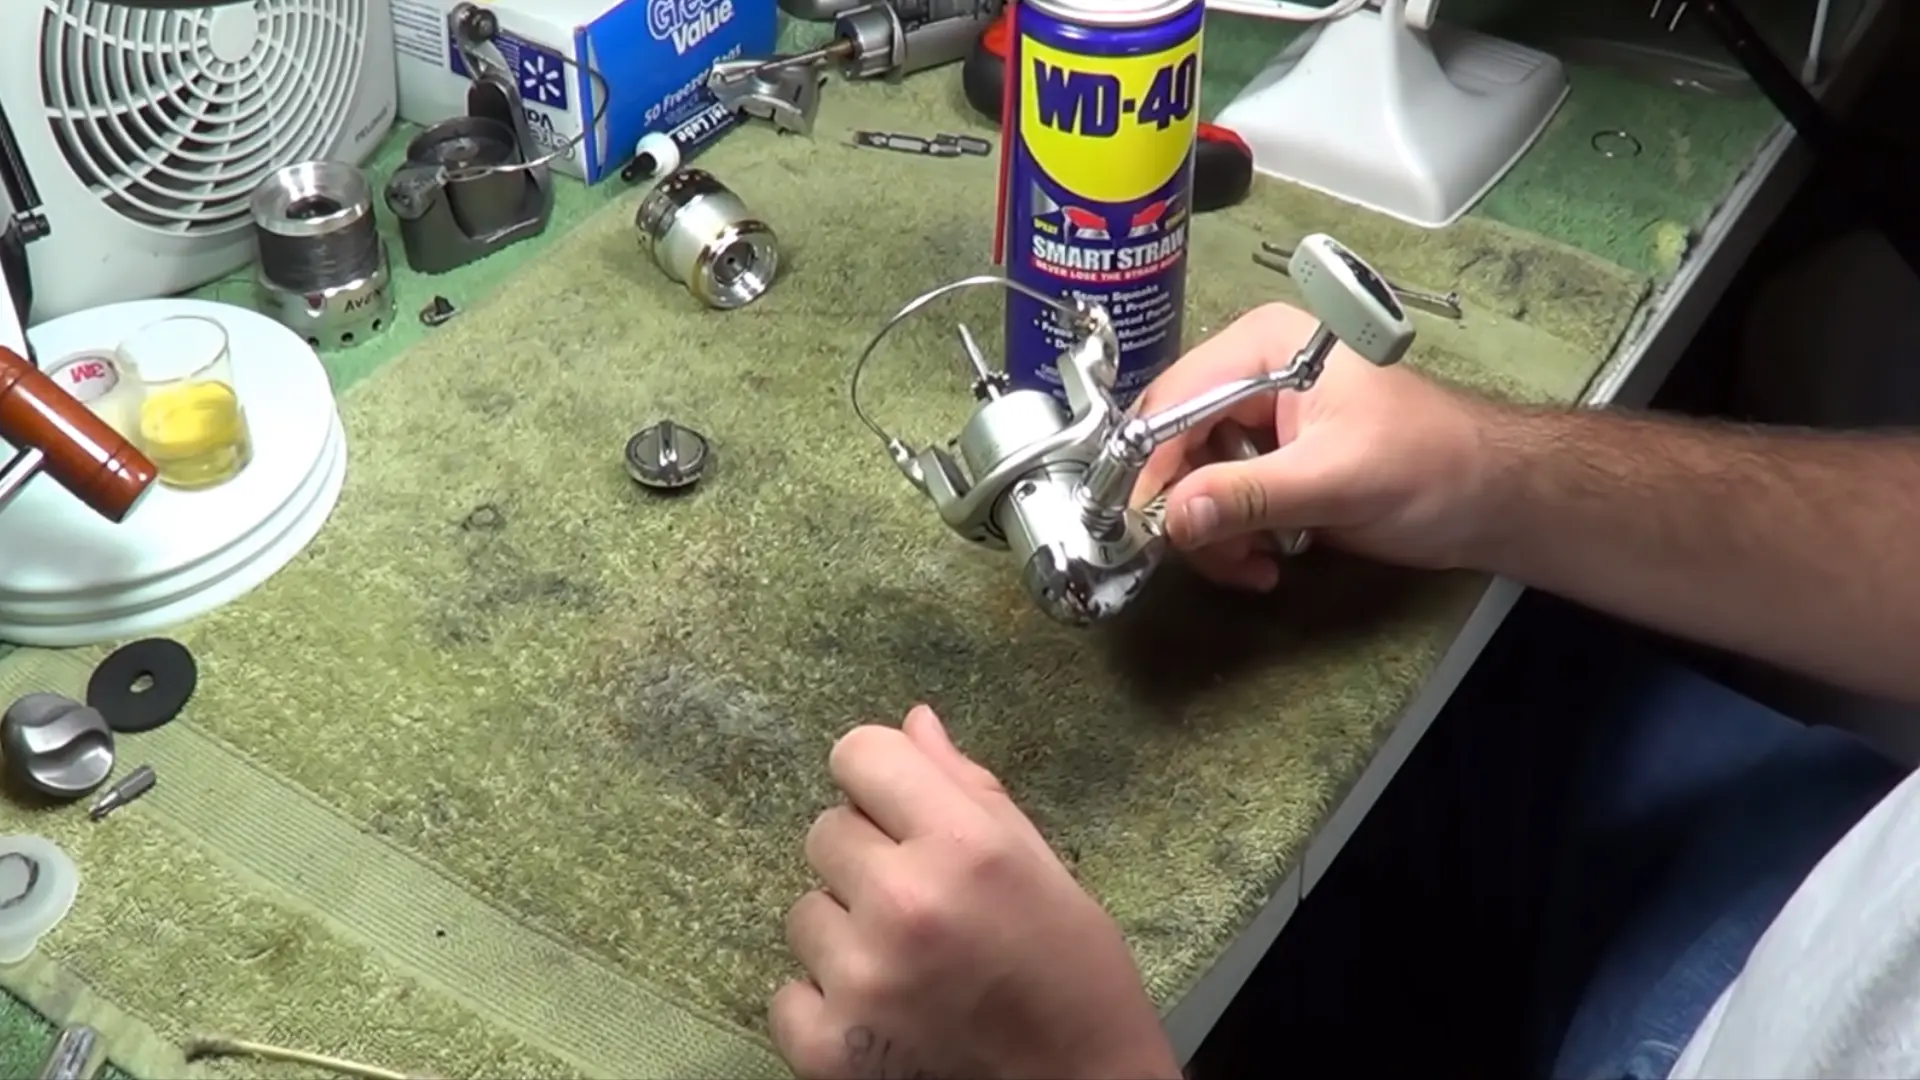 Learn to Clean the Fishing Reel Properly